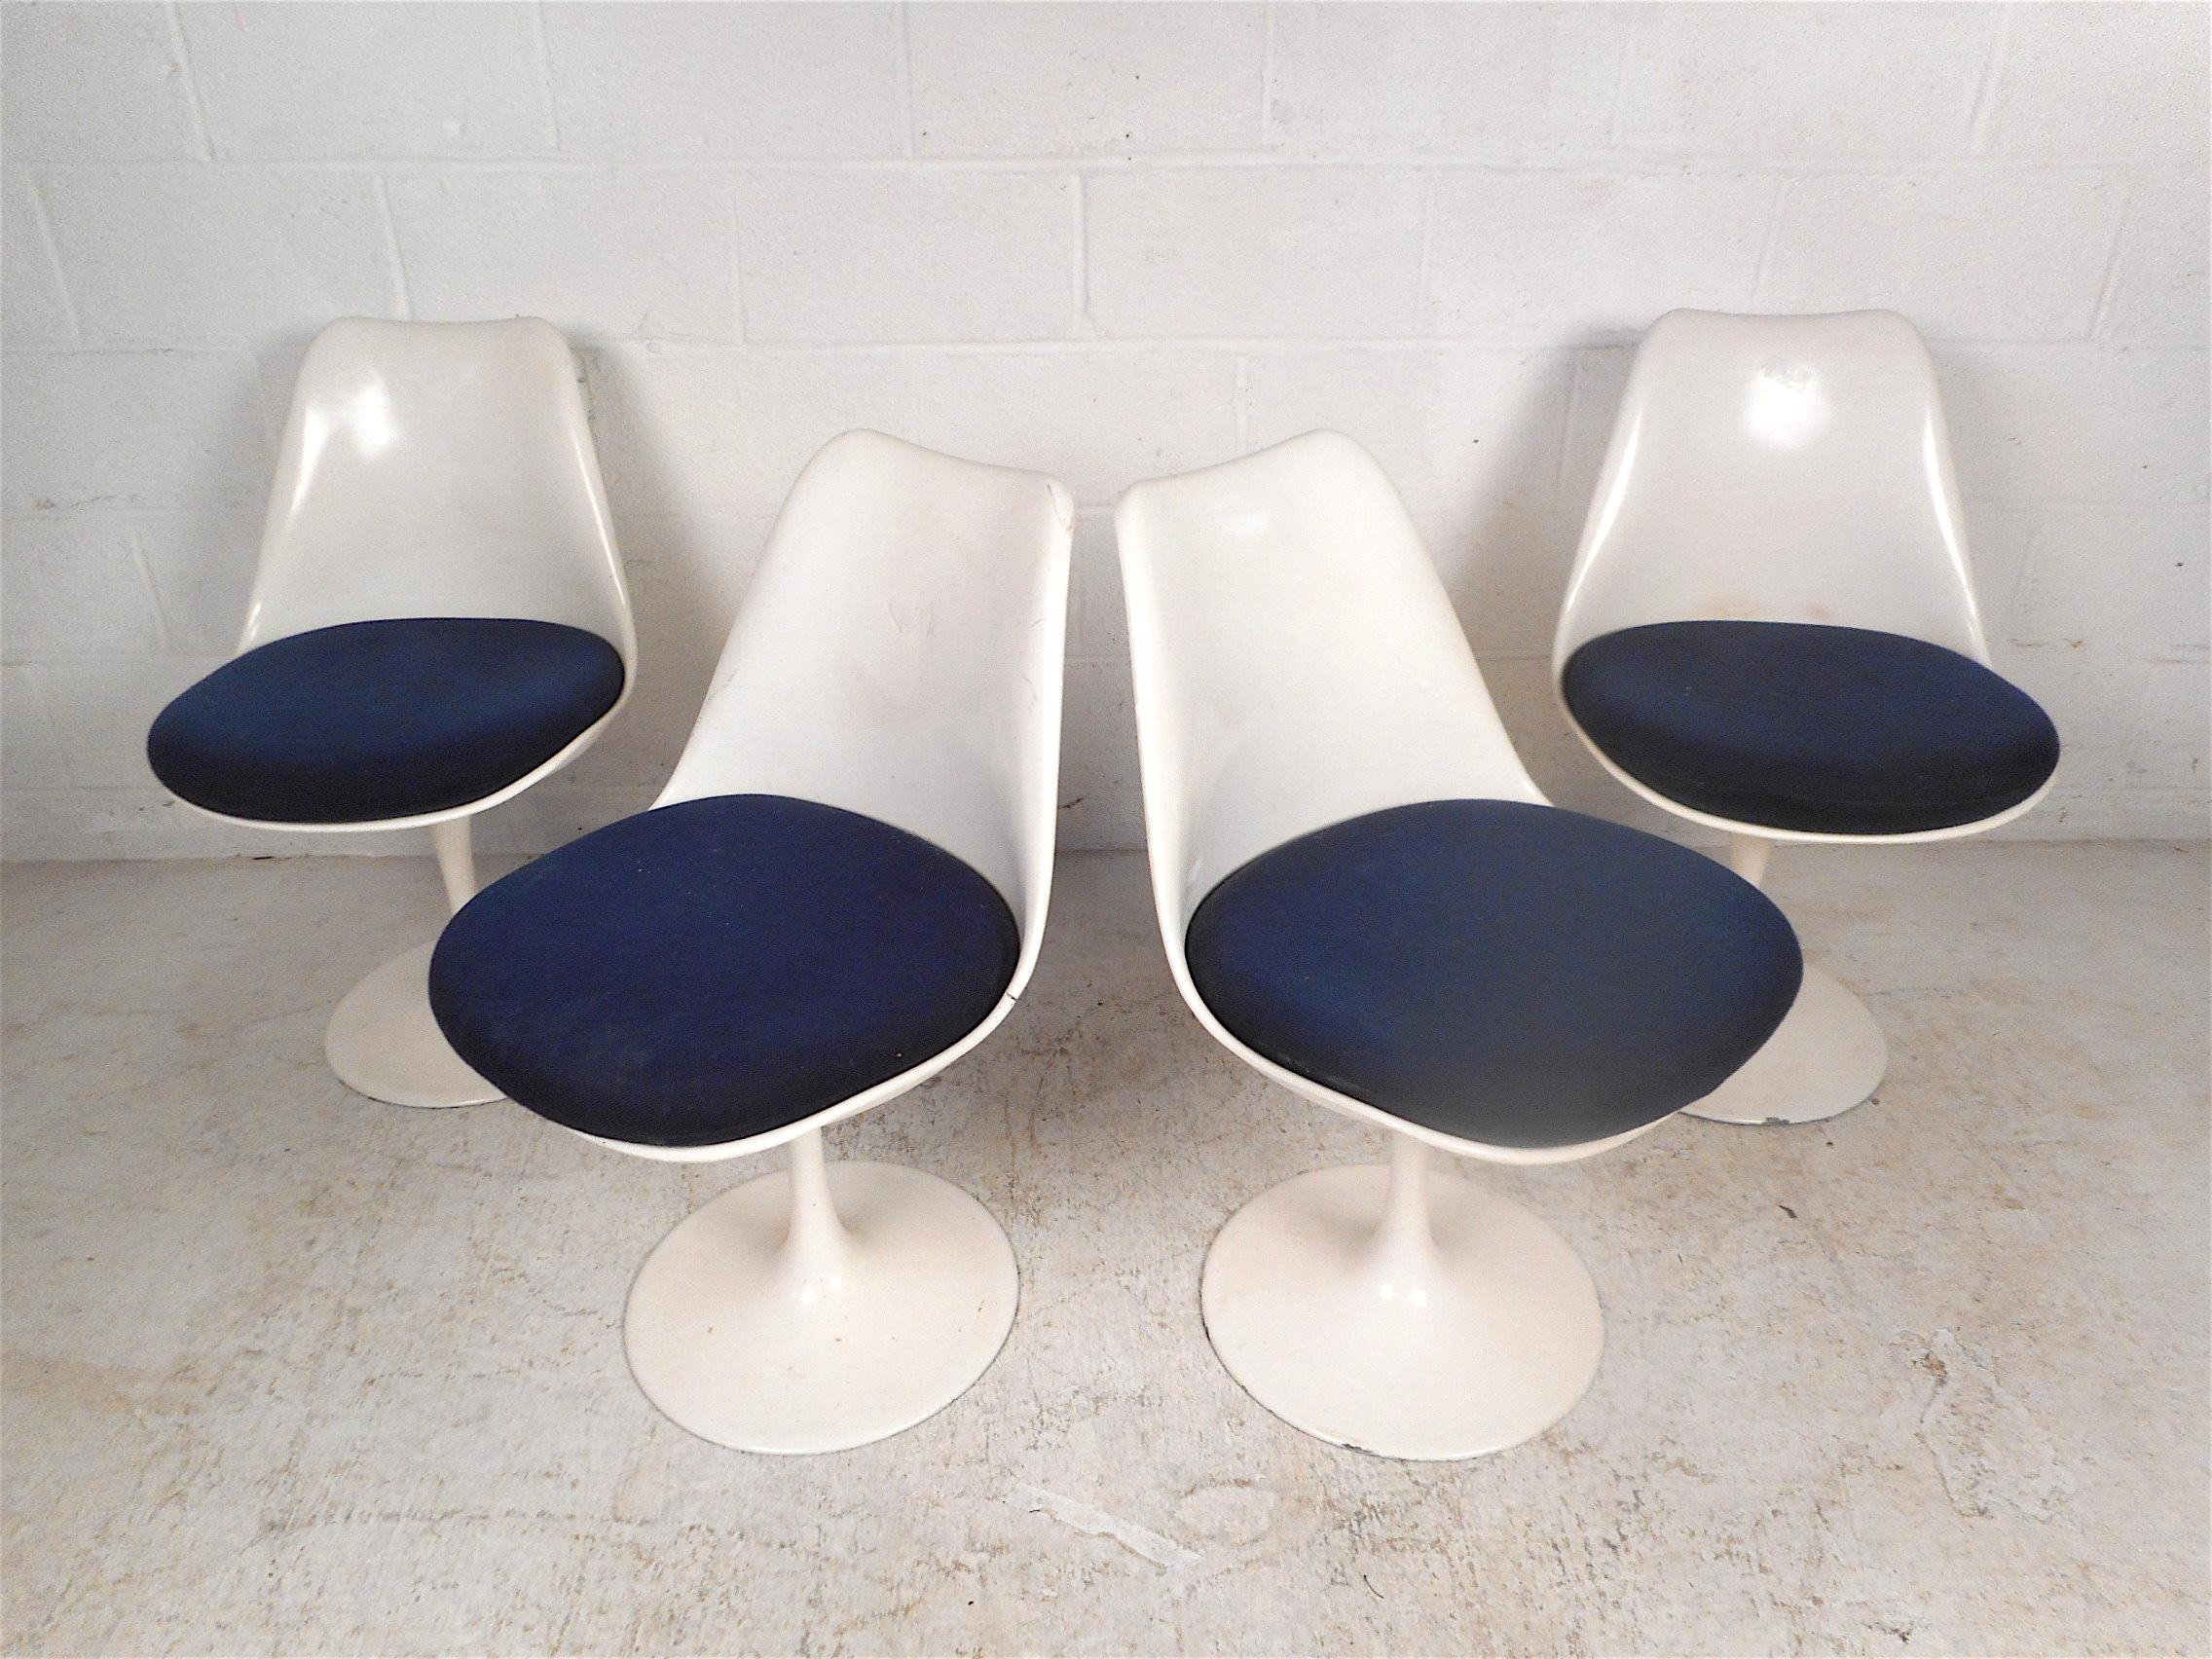 Stylish midcentury dining set by Rudi Bonzanini. Set includes four swiveling Tulip chairs and a circular table. Sleek design, the chairs and table compliment each other nicely. Classic midcentury design sure to please in any home, business, or